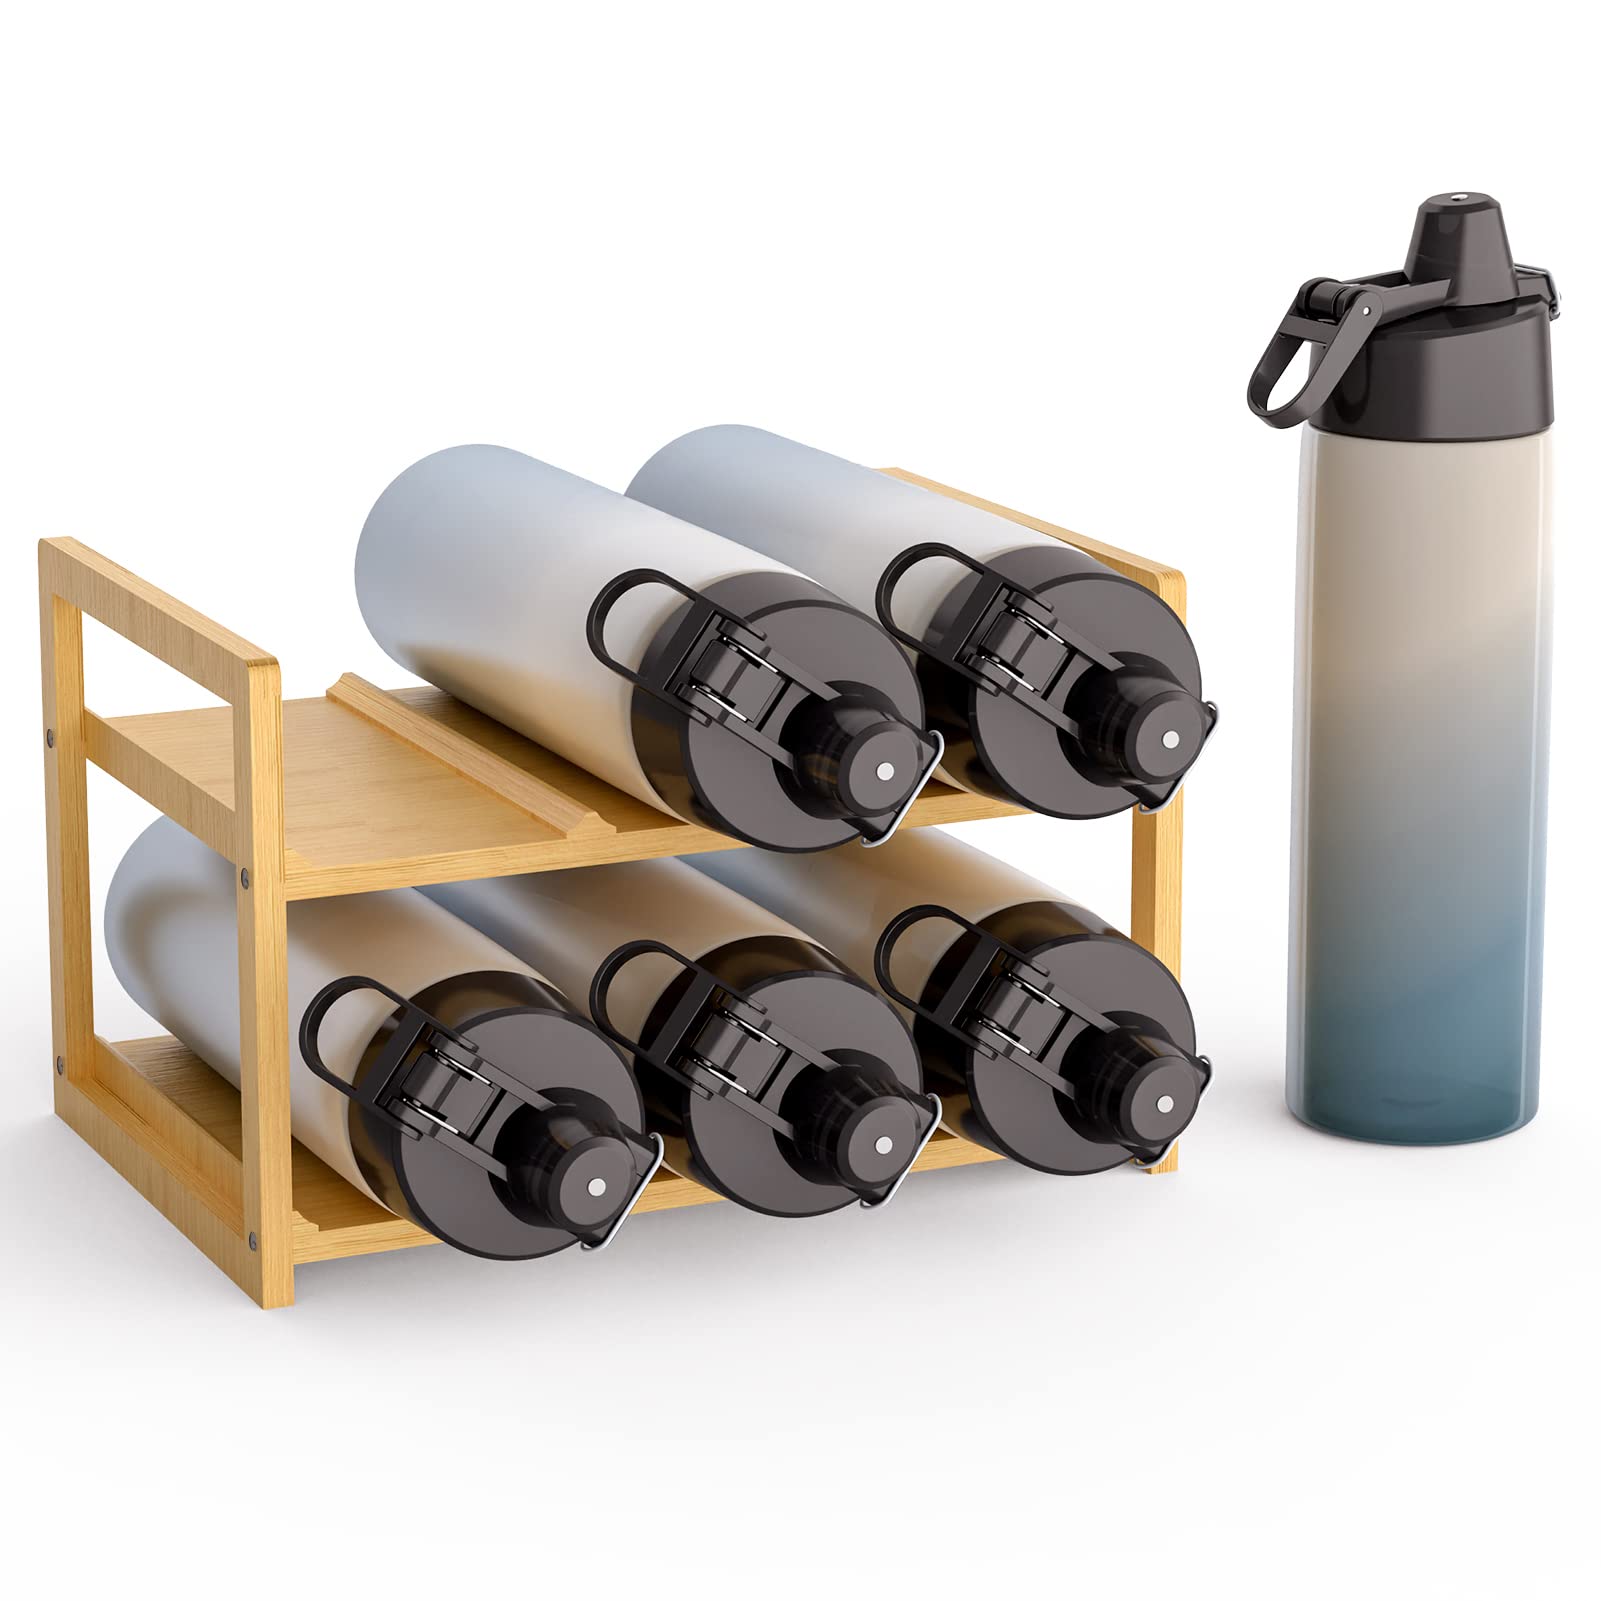 3-Tier Bamboo Water Bottle Organizer For Cabinet or Pantry Kitchen